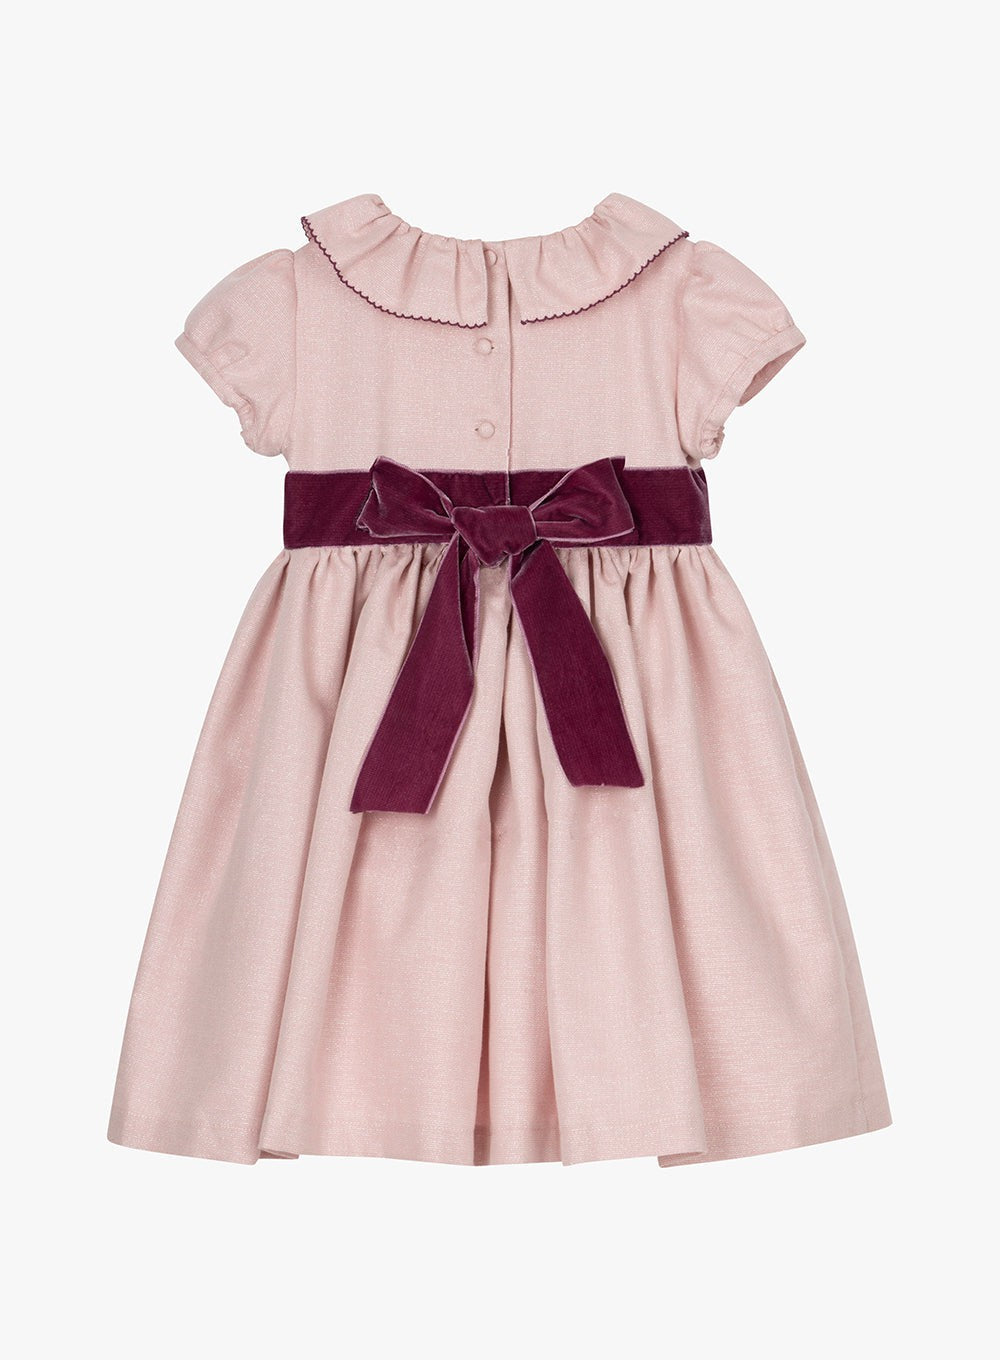 Lily Rose Gold Dress Hetty Willow Dress